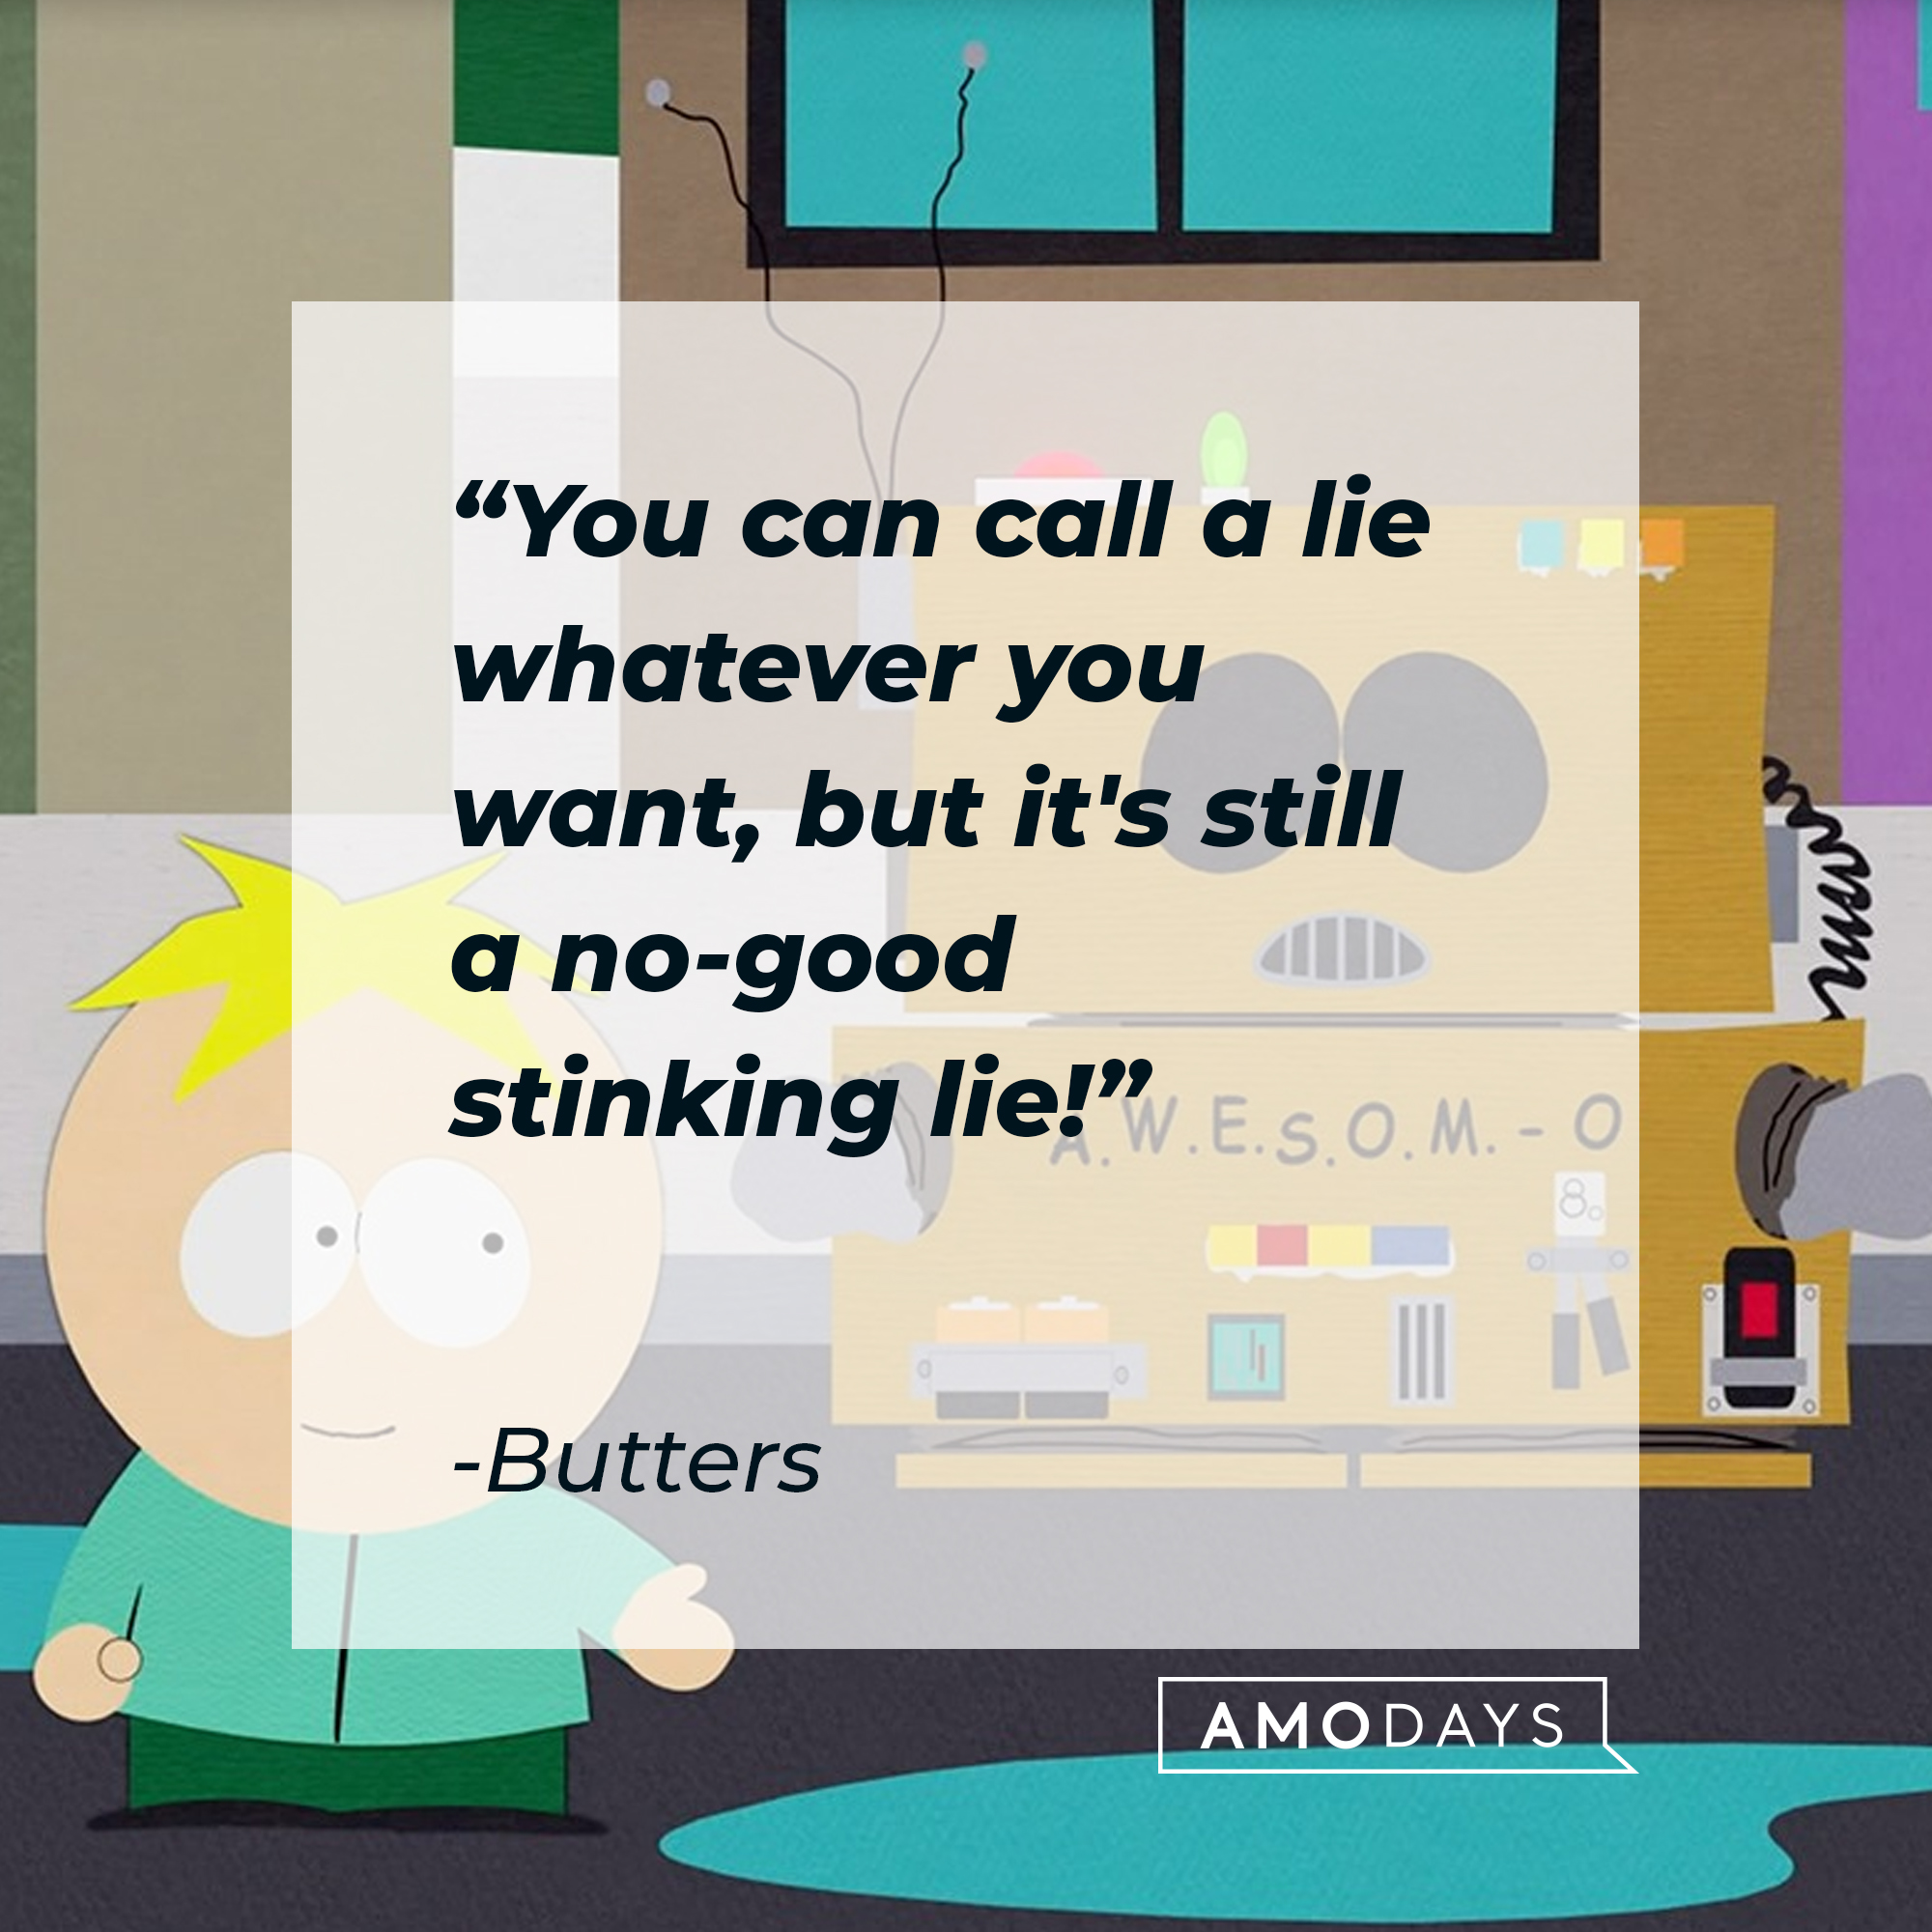 Butters' quote: "You can call a lie whatever you want, but it's still a no-good stinking lie!" | Source: facebook.com/southpark